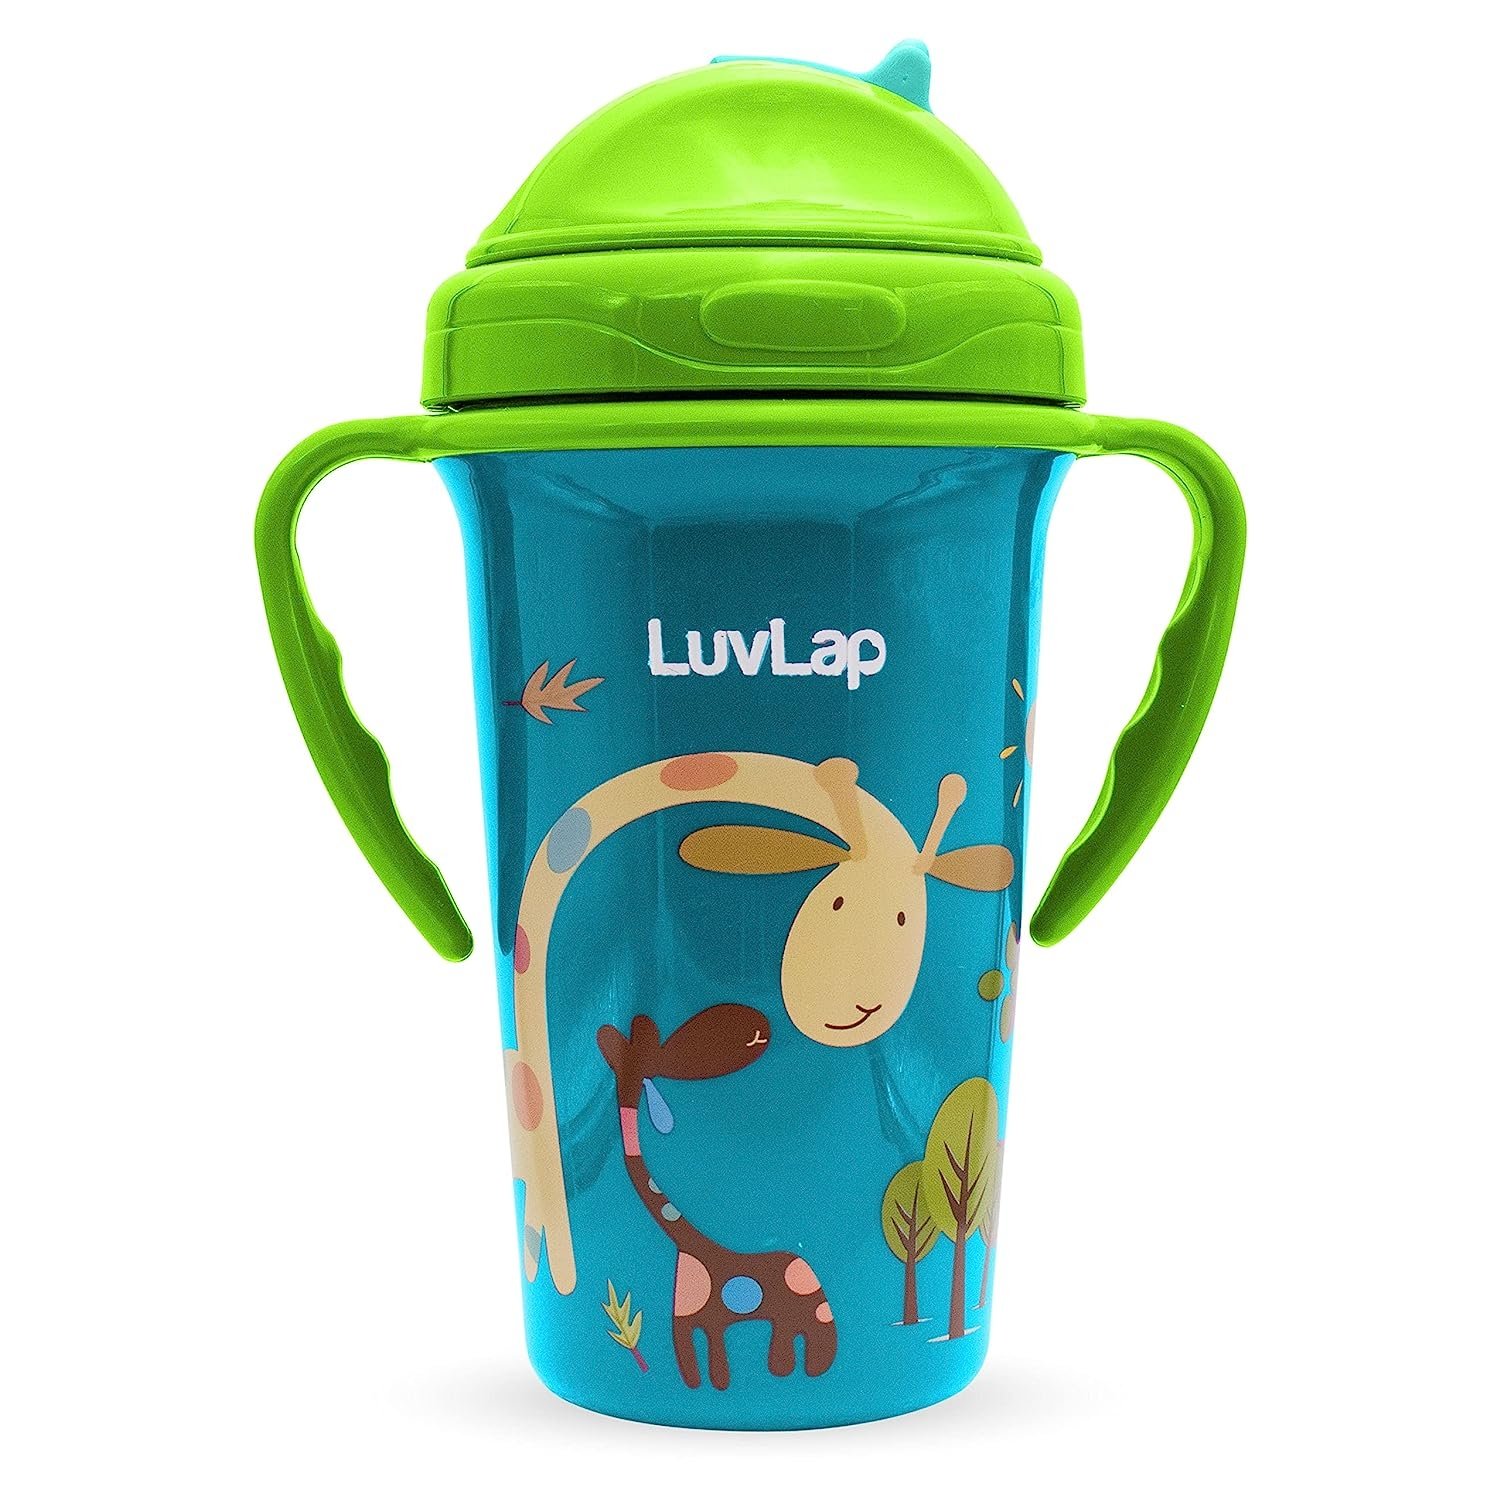 LuvLap Tiny Giffy Sipper for Infant/Toddler 300ml, Anti-Spill Sippy Cup with Soft Silicone Straw BPA Free, 18m+ (Green)